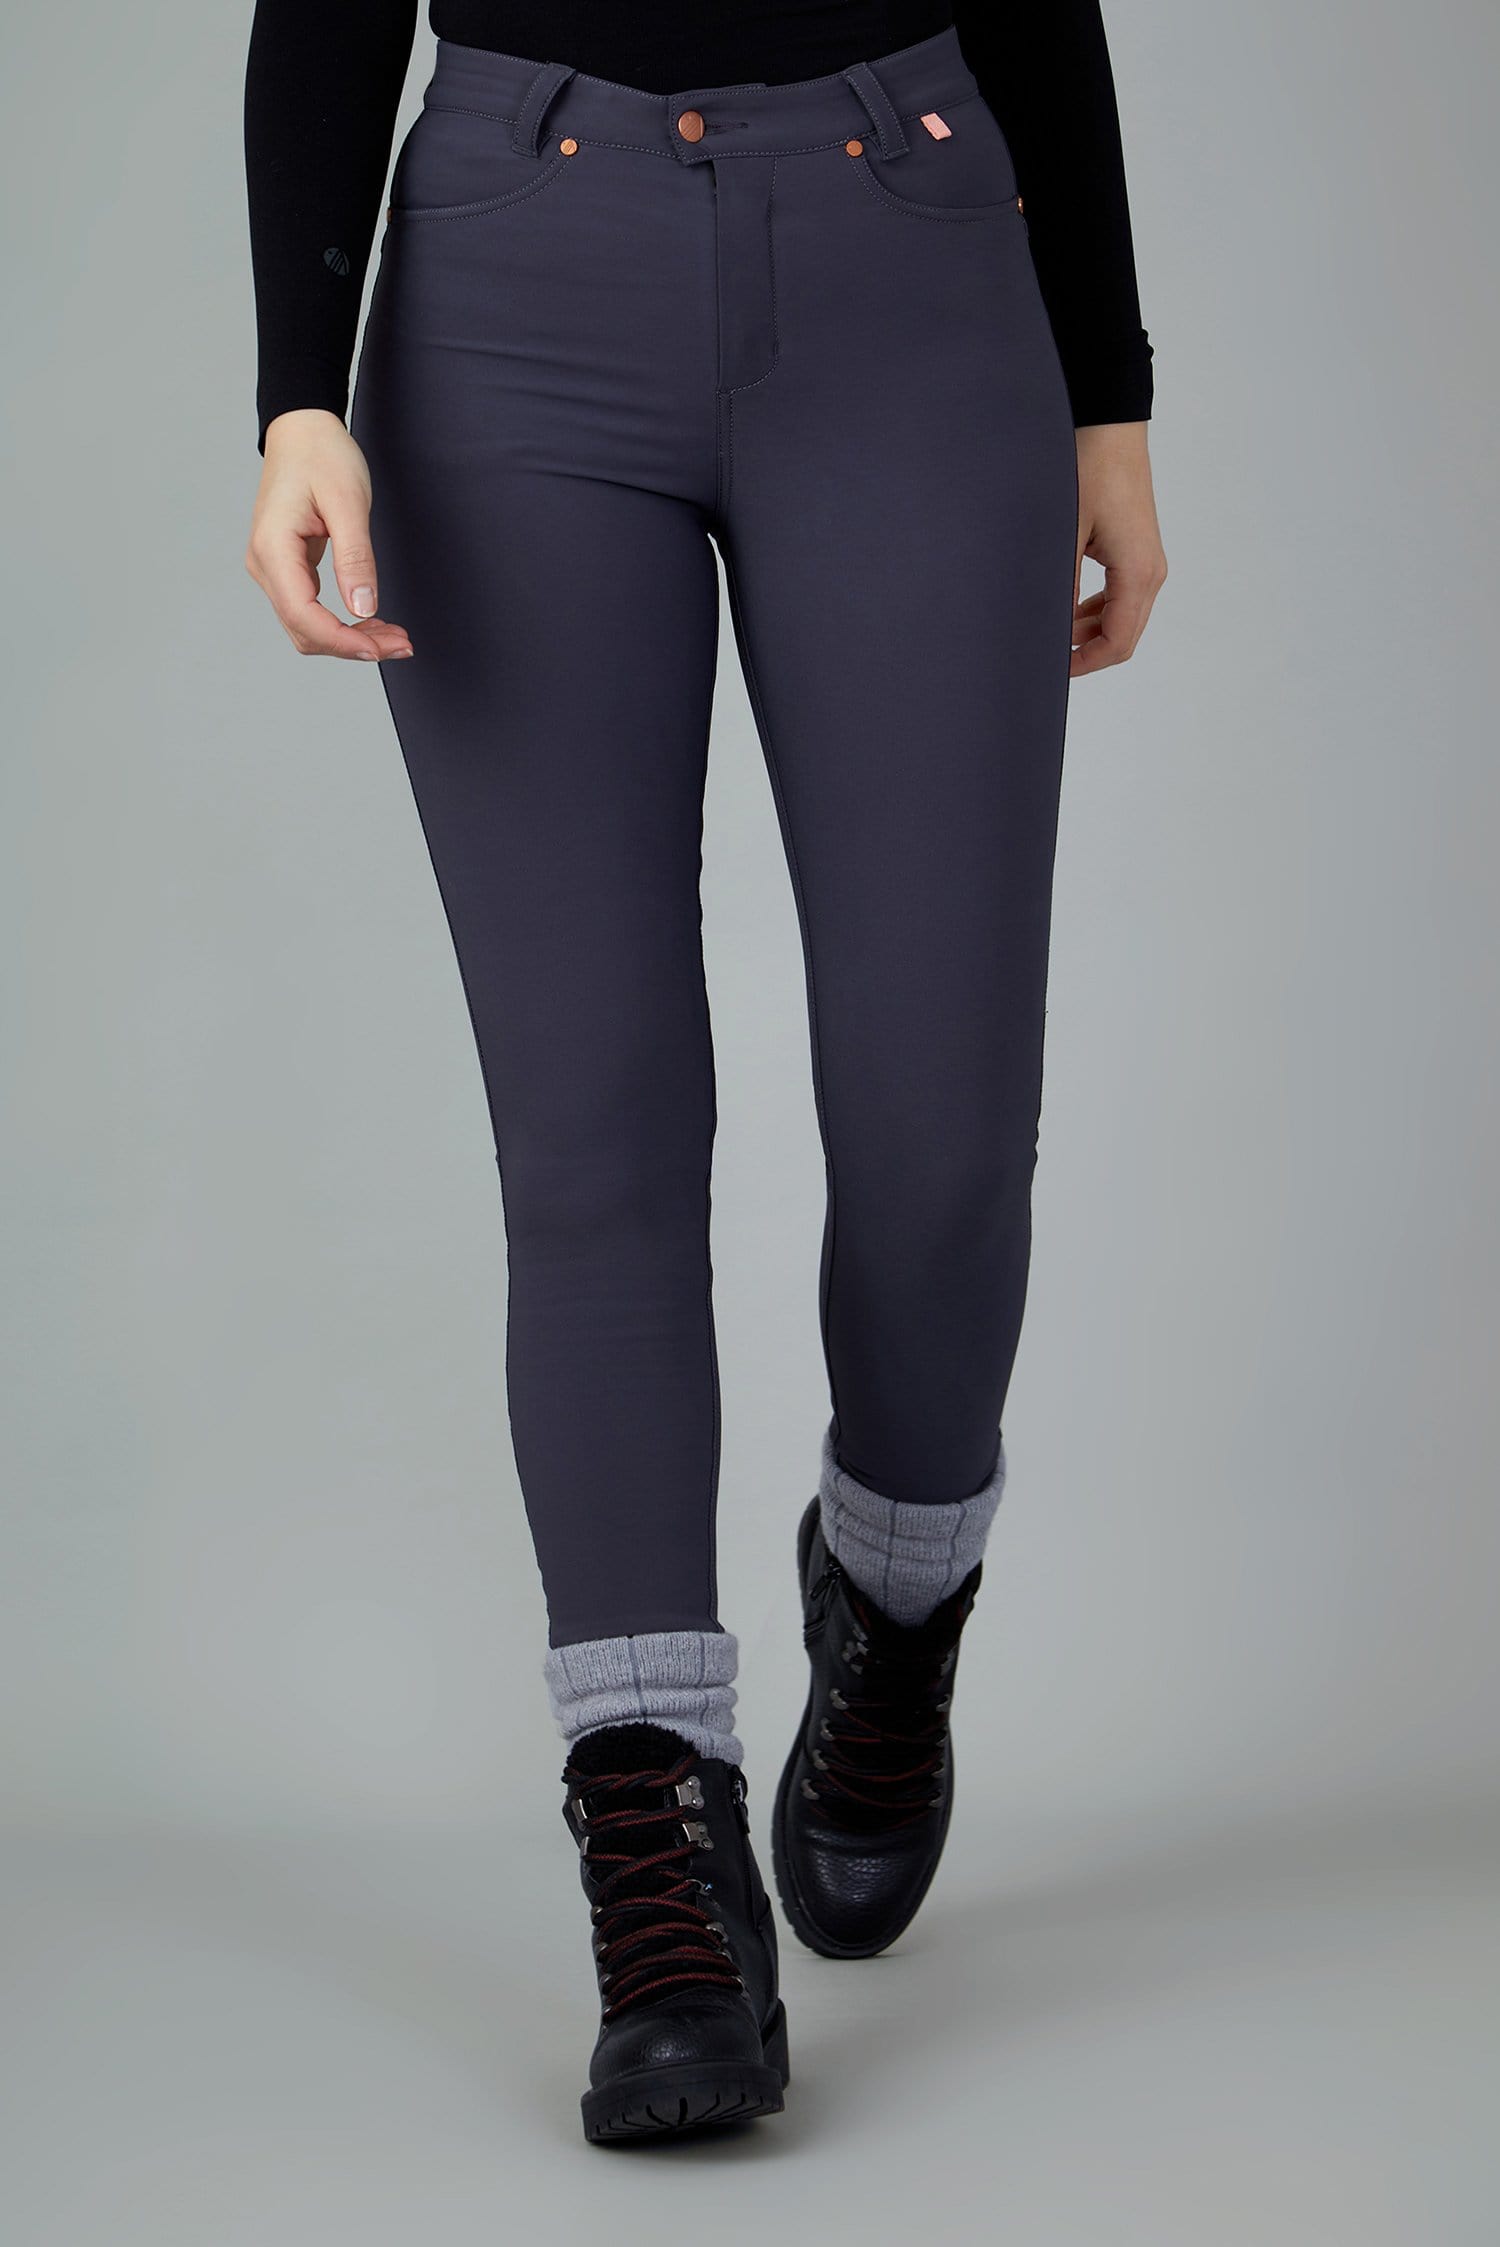 The Aventurite Stretch Skinny Outdoor Trousers - Obsidian - 32l / Uk14 - Womens - Acai Outdoorwear